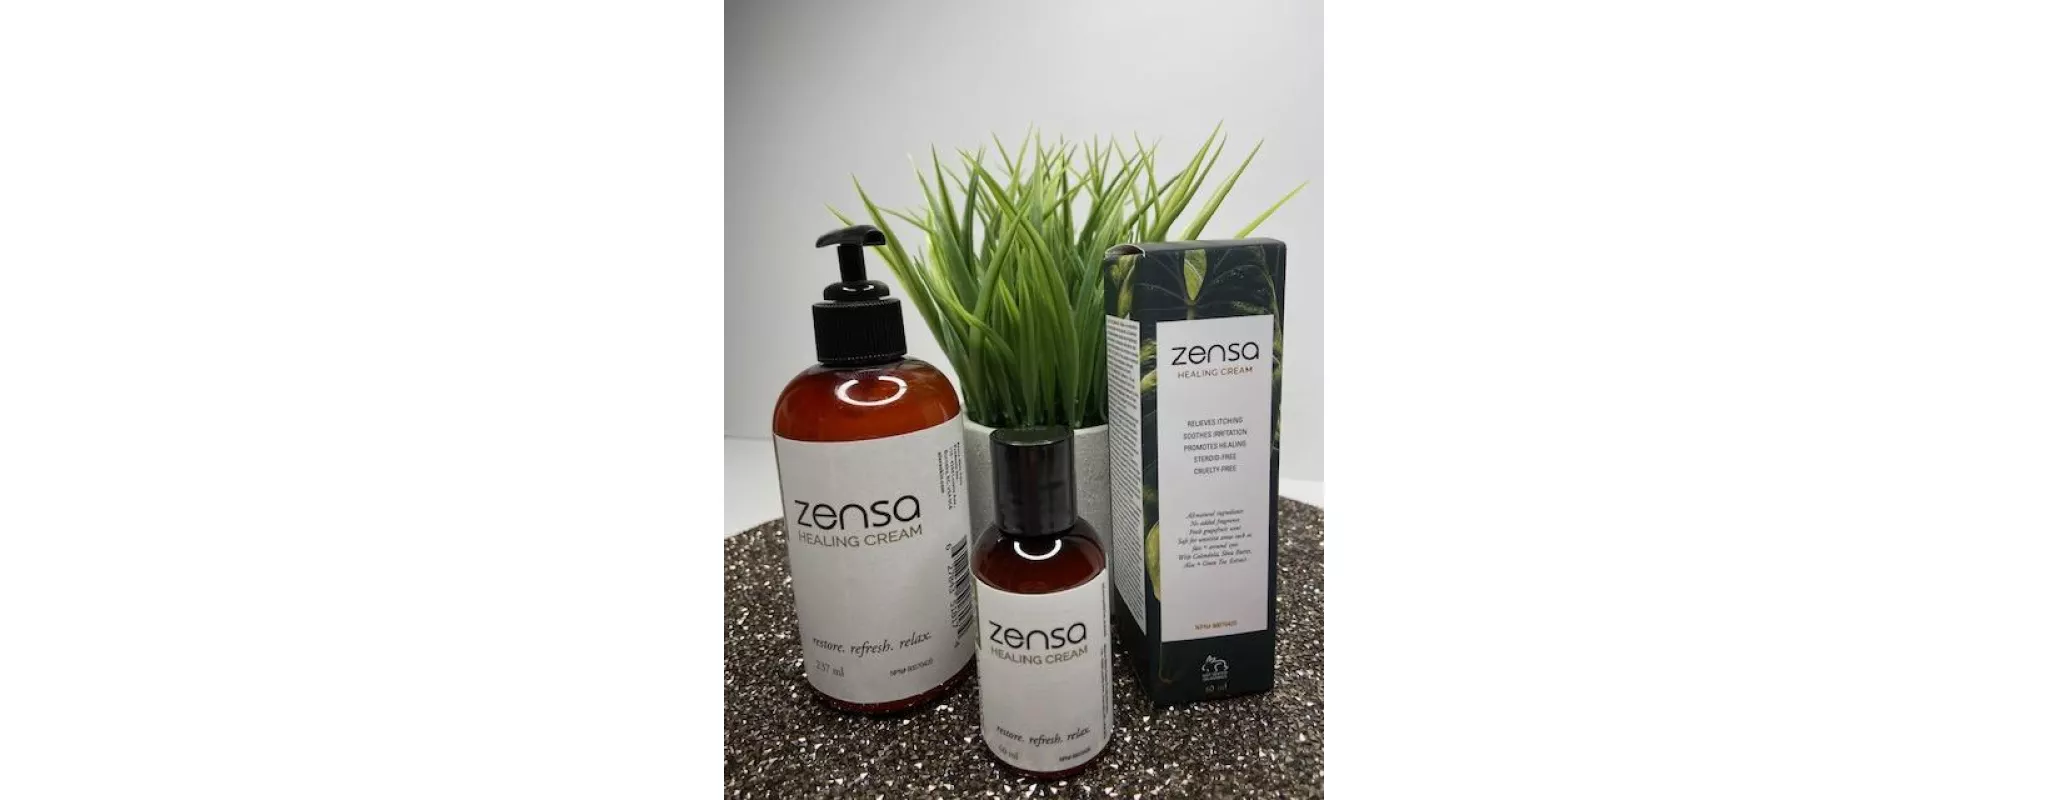 Zensa Healing Cream come in two sizes, 60ml and 237ml.